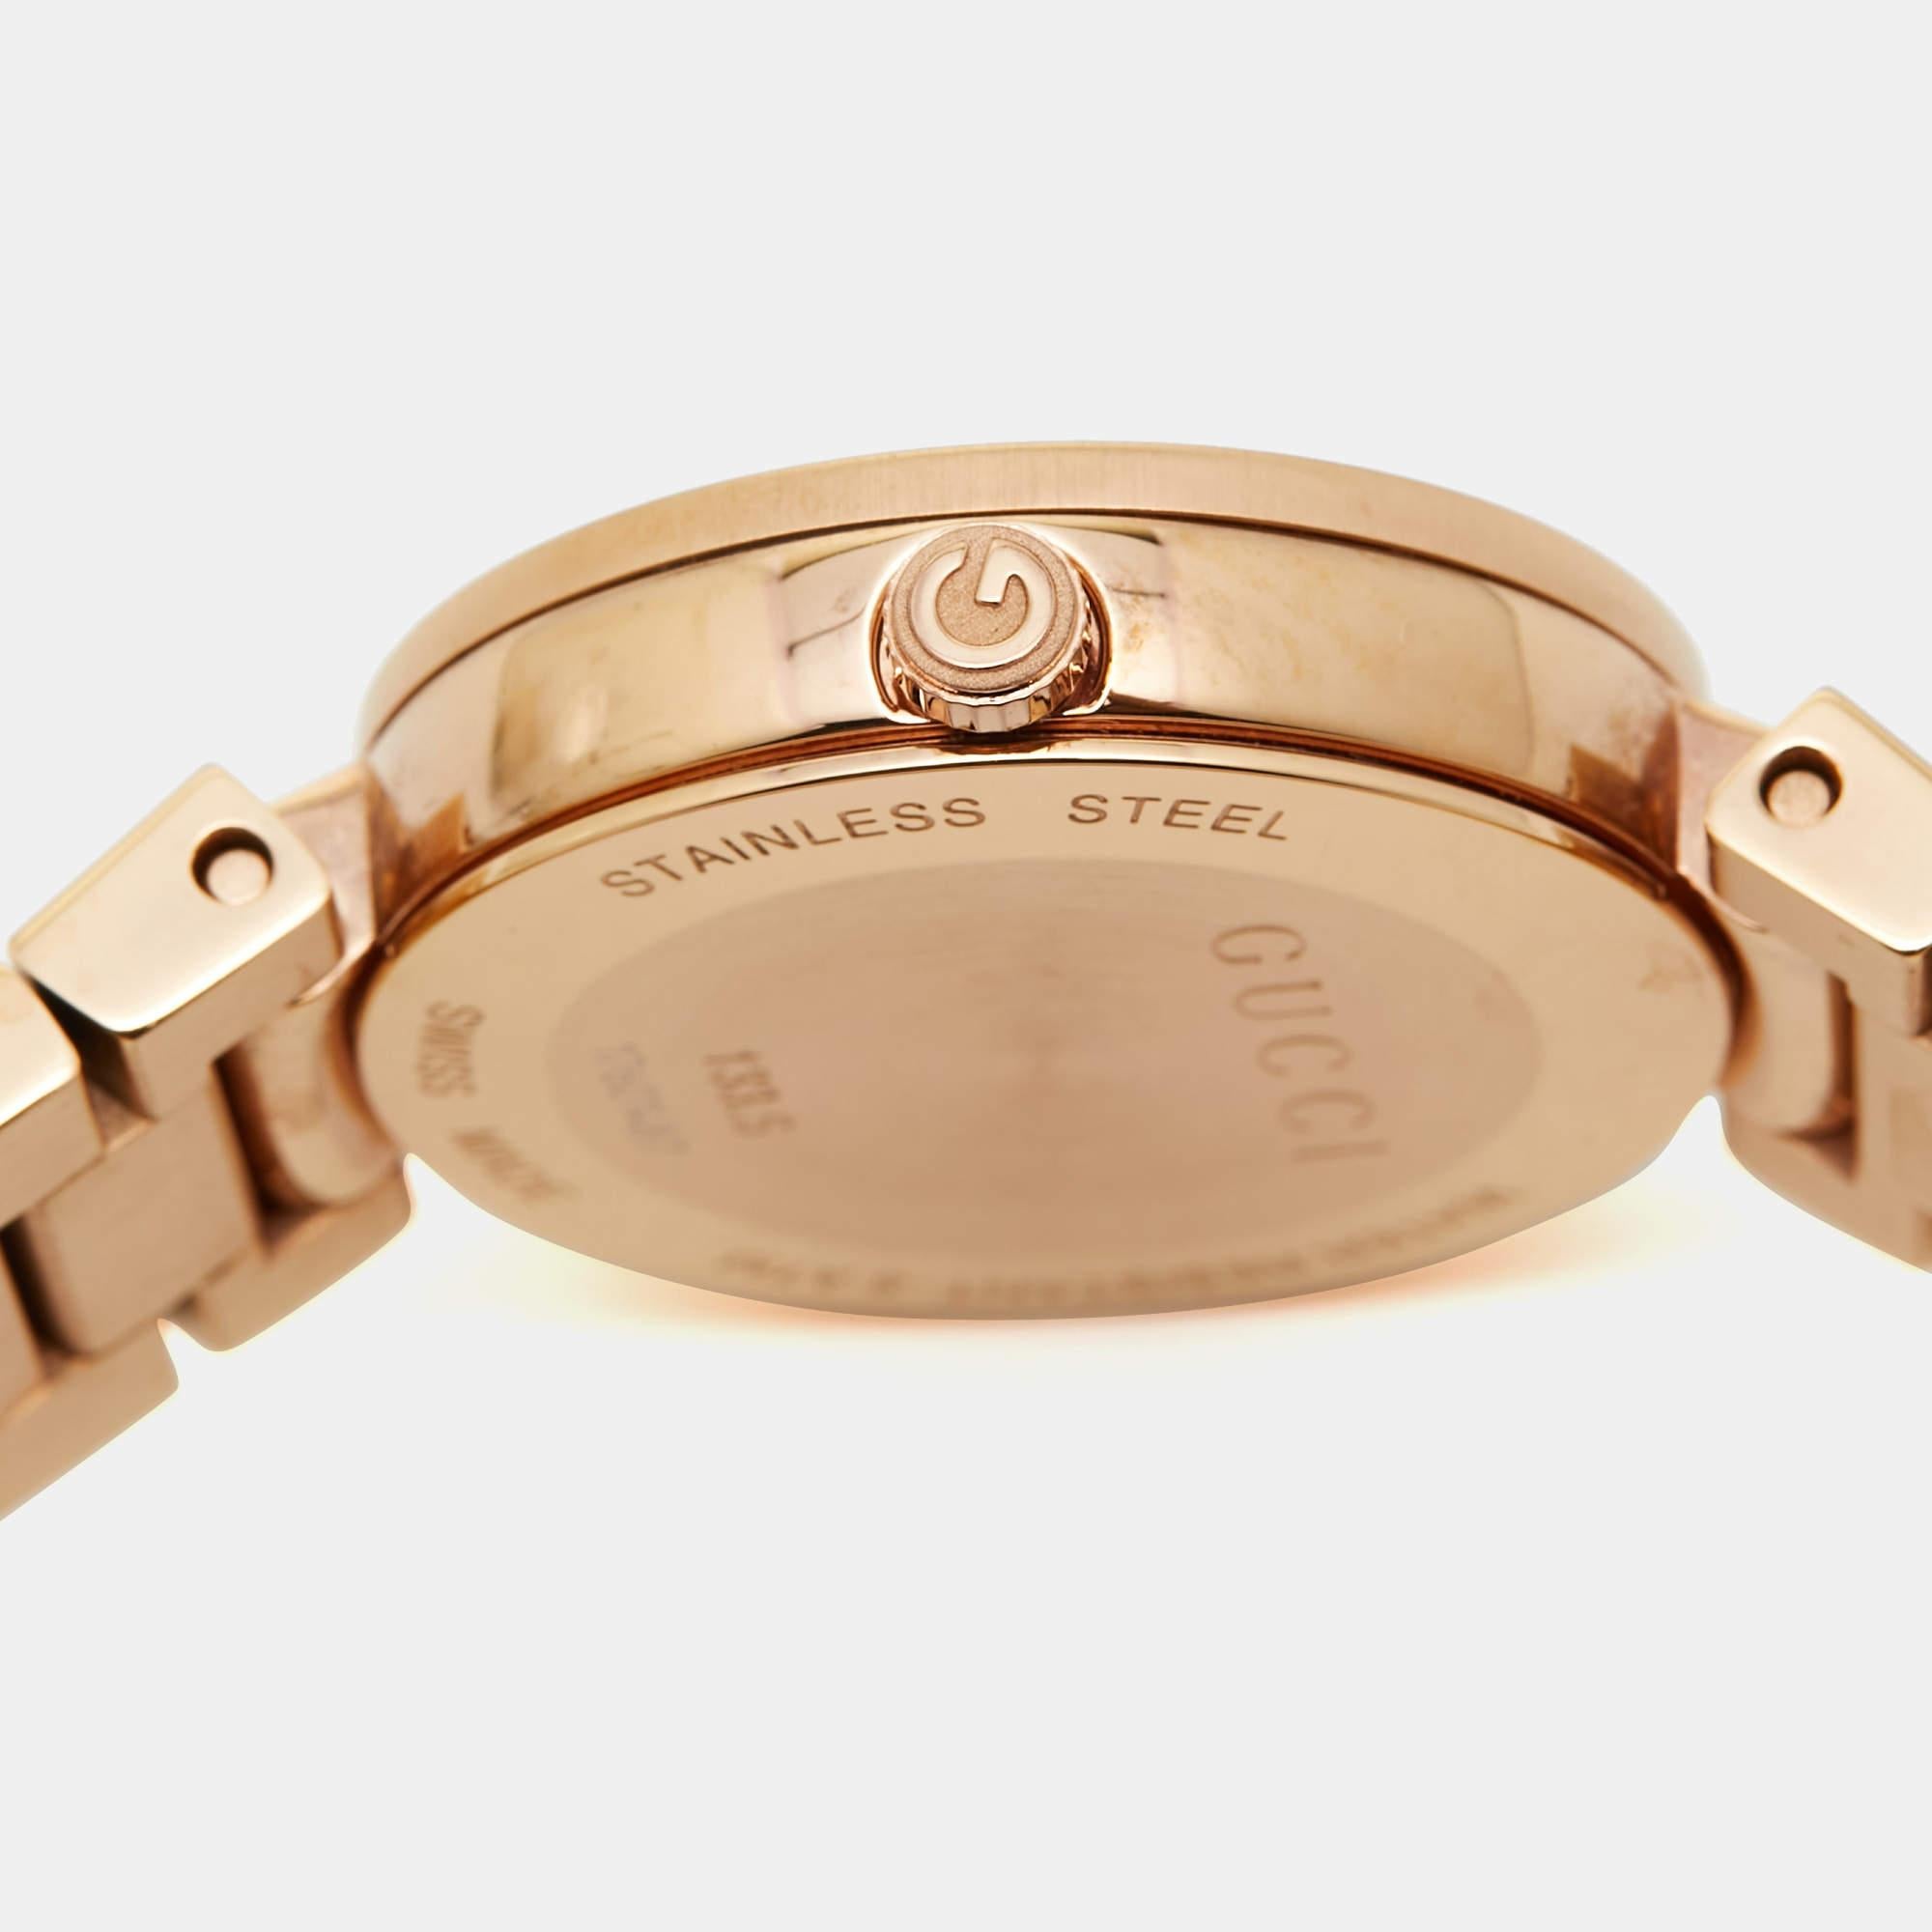 Rose Cut Gucci Mother Of Pearl Rose Gold Tone Stainless Steel Interlocking YA133515 Women